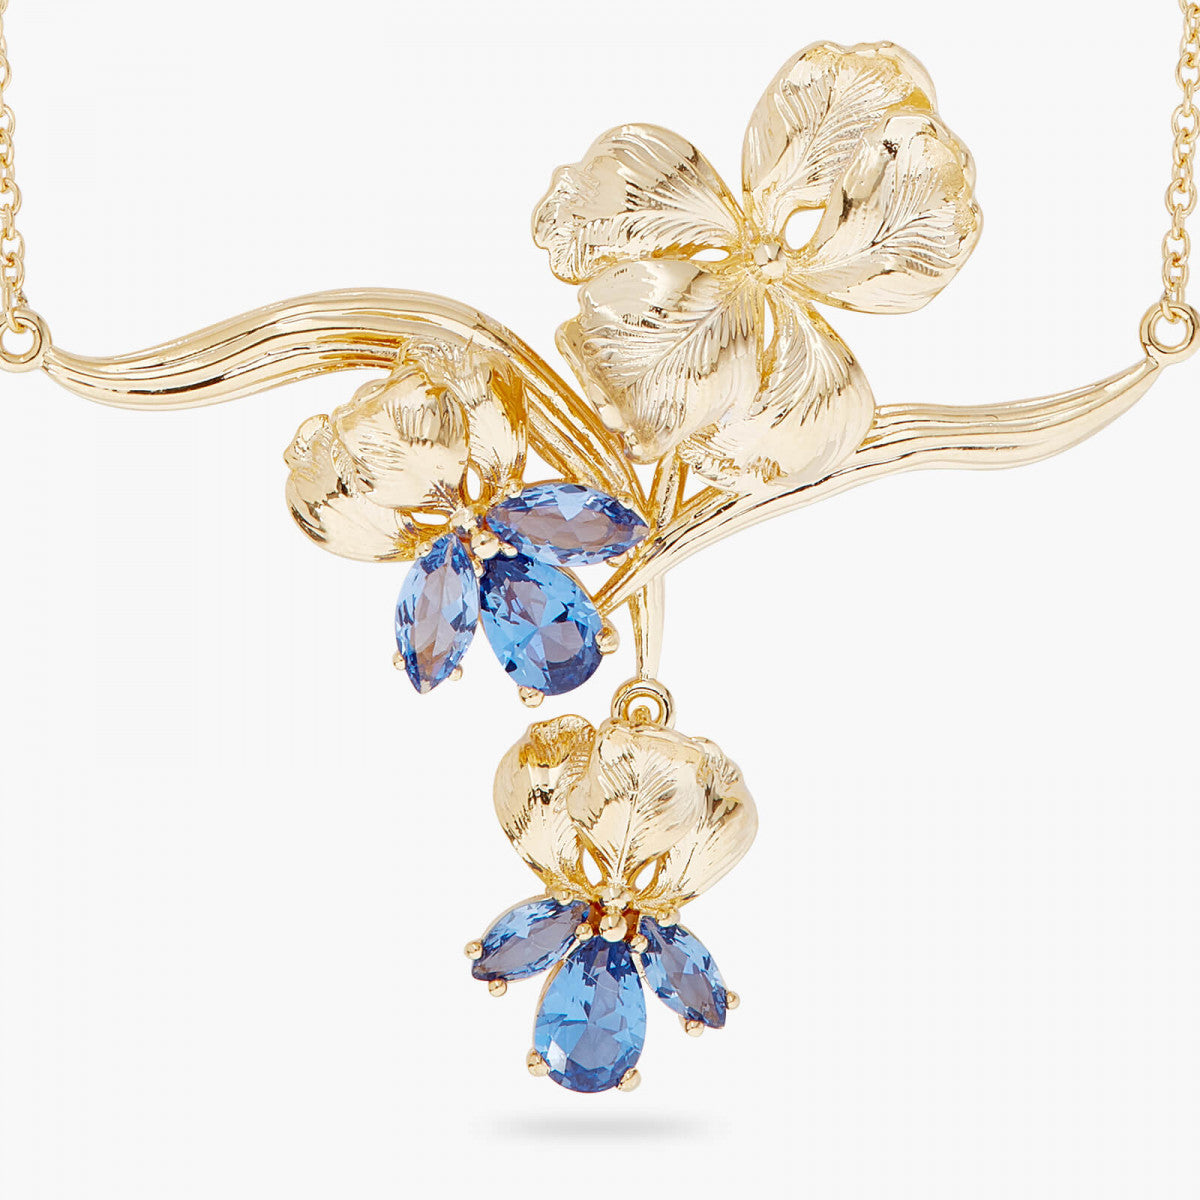 GOLD IRIS AND BLUE CRYSTAL STATEMENT NECKLACE